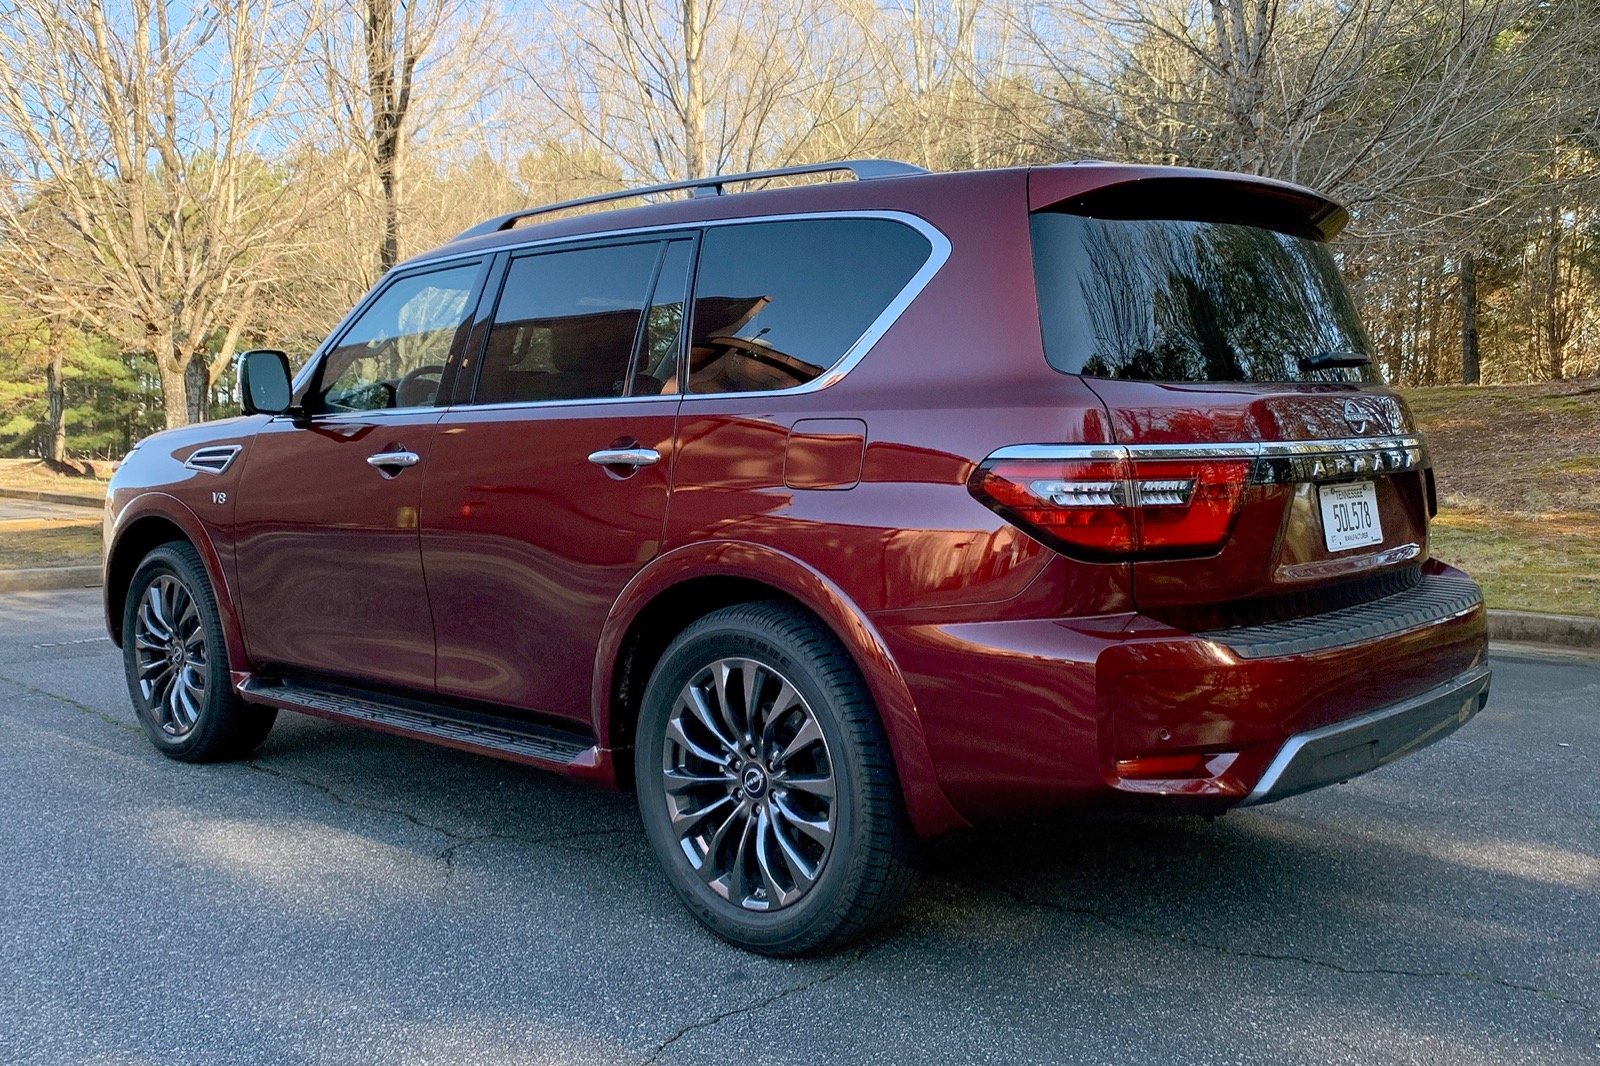 2021 Nissan Armada Test Drive Review